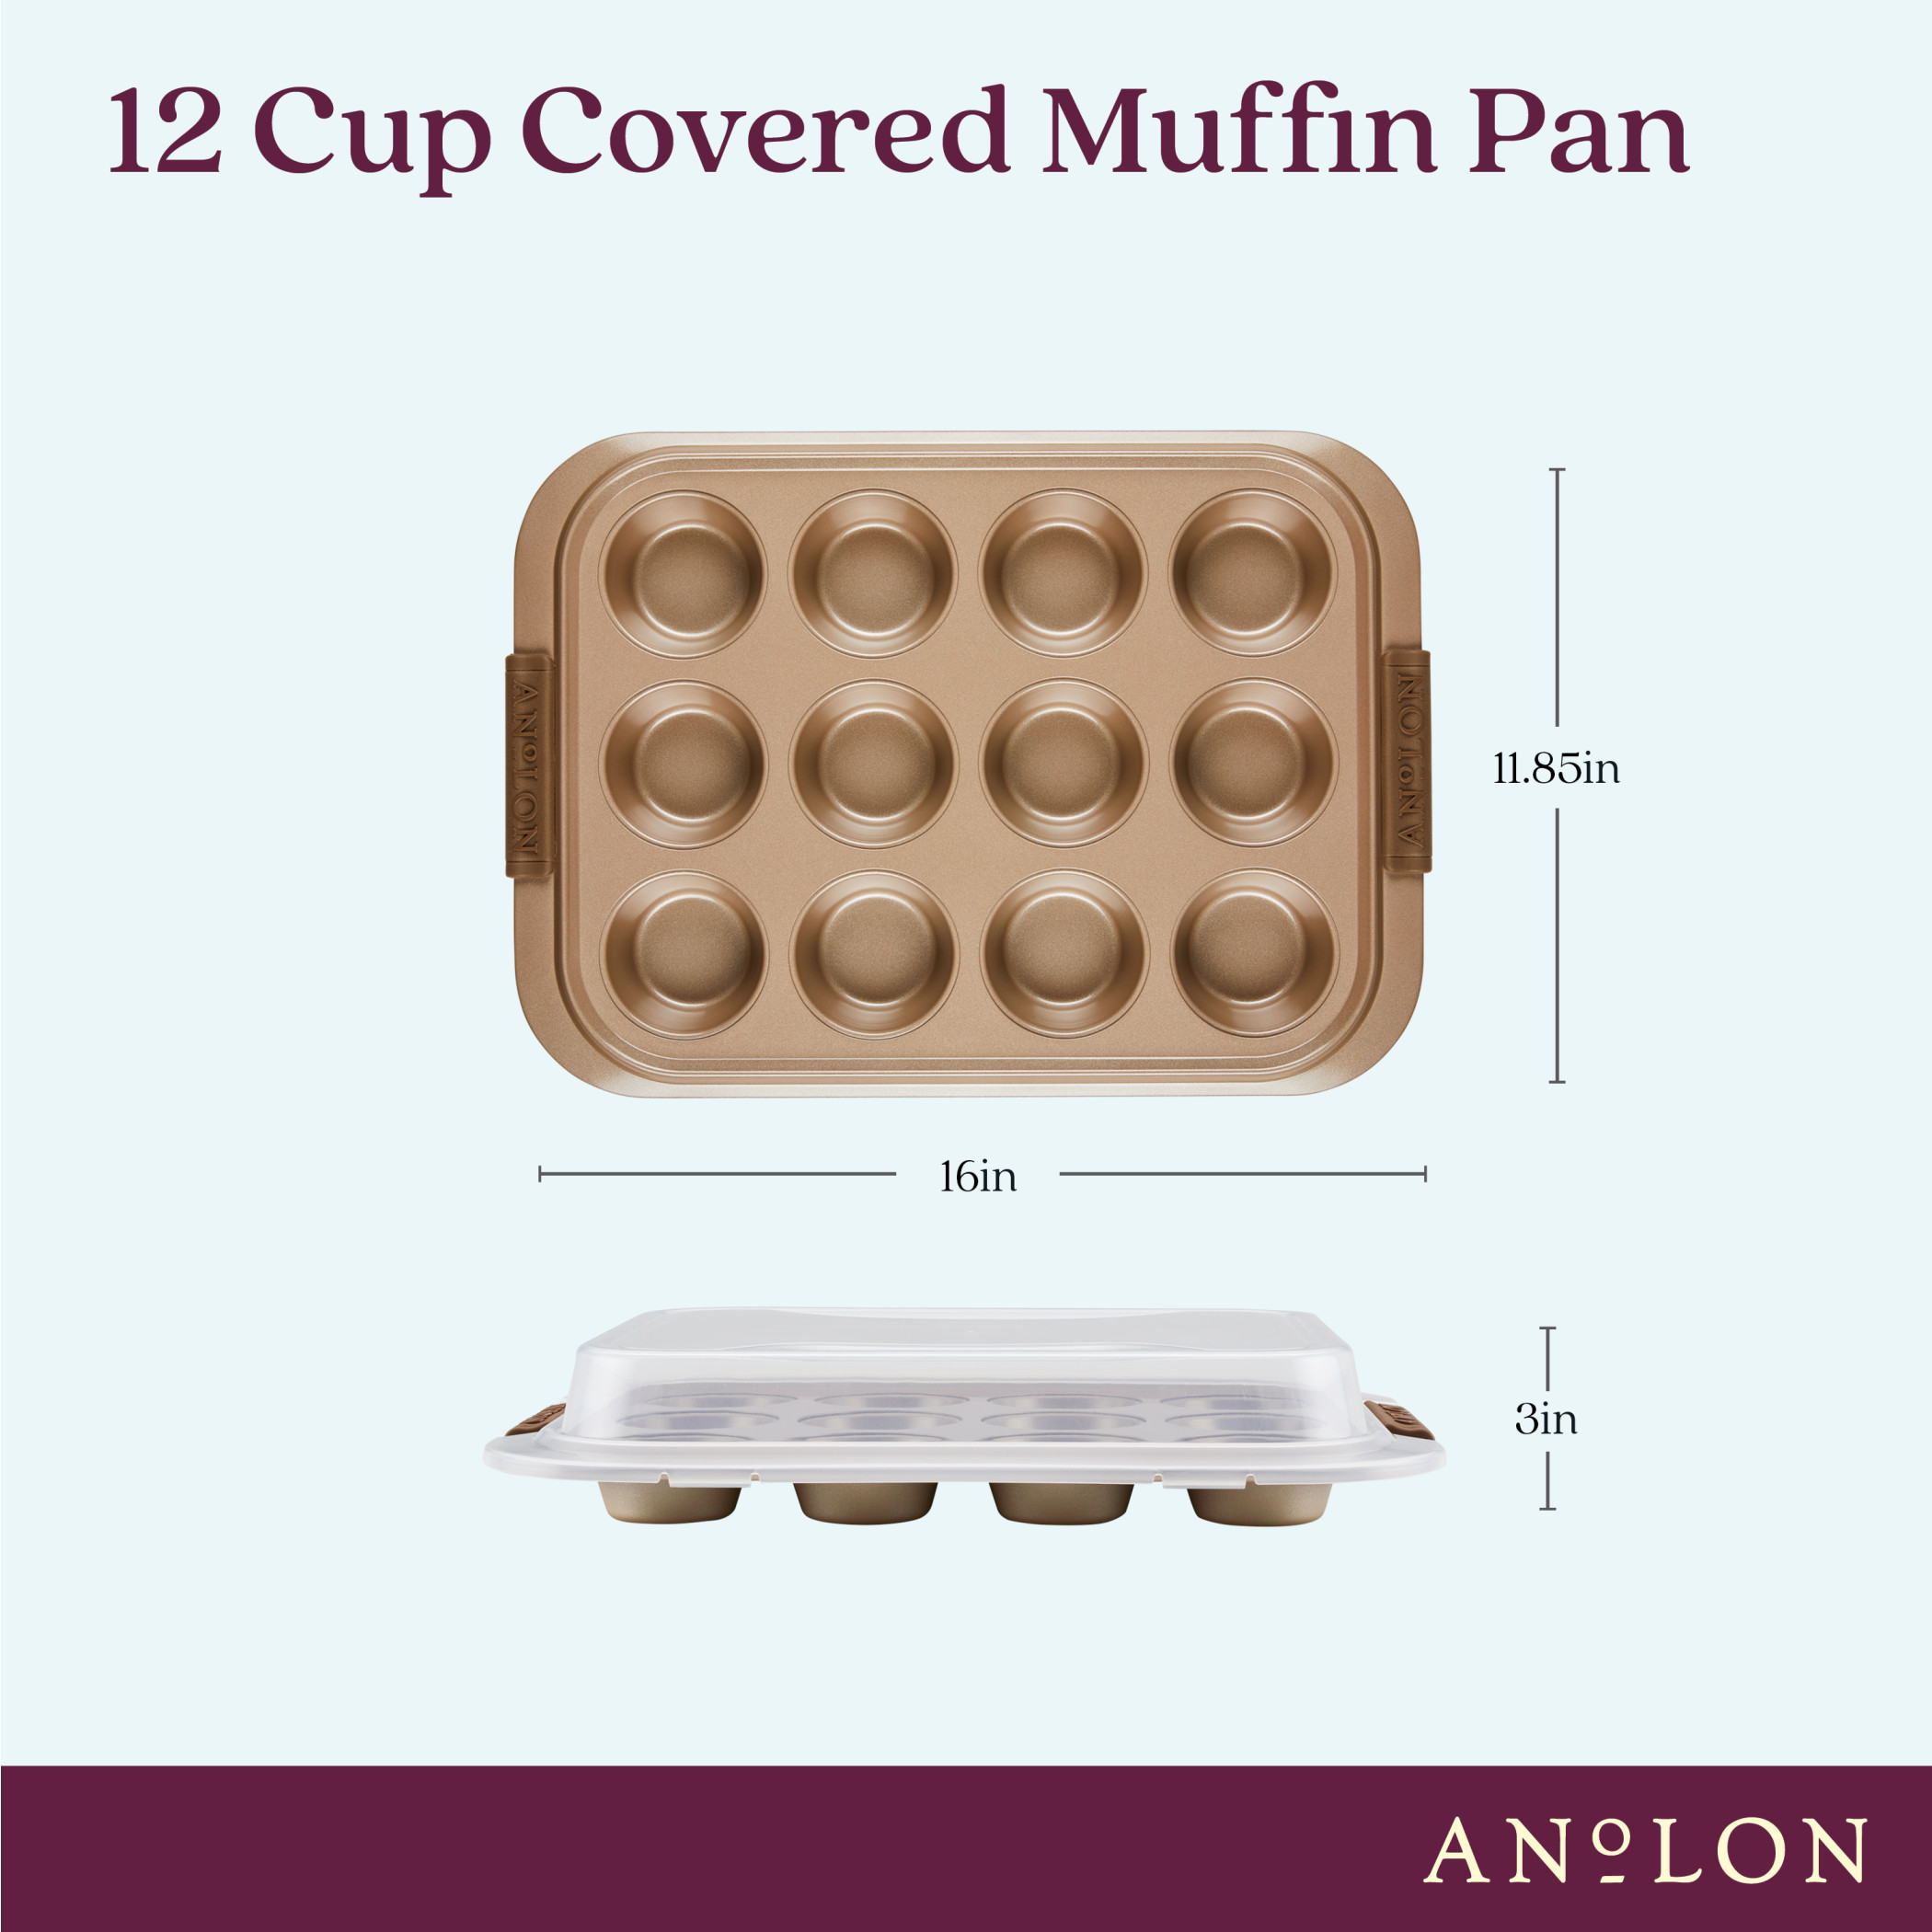 Anolon Advanced Bronze Nonstick Bakeware 12-Cup Muffin Pan with Silicone Grips - image 3 of 7